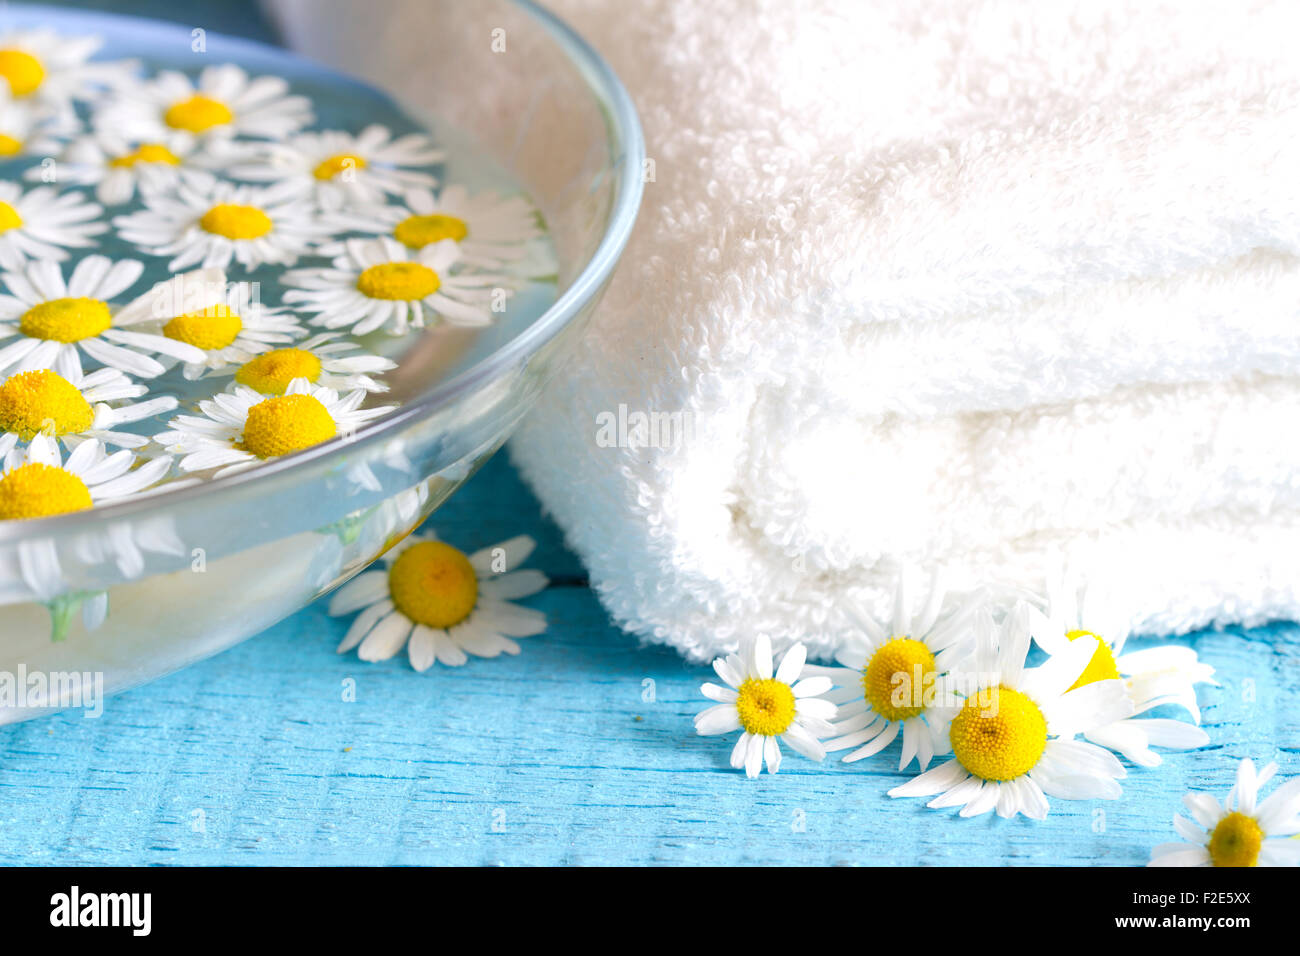 Camomile extract with towel on blue boards background Stock Photo